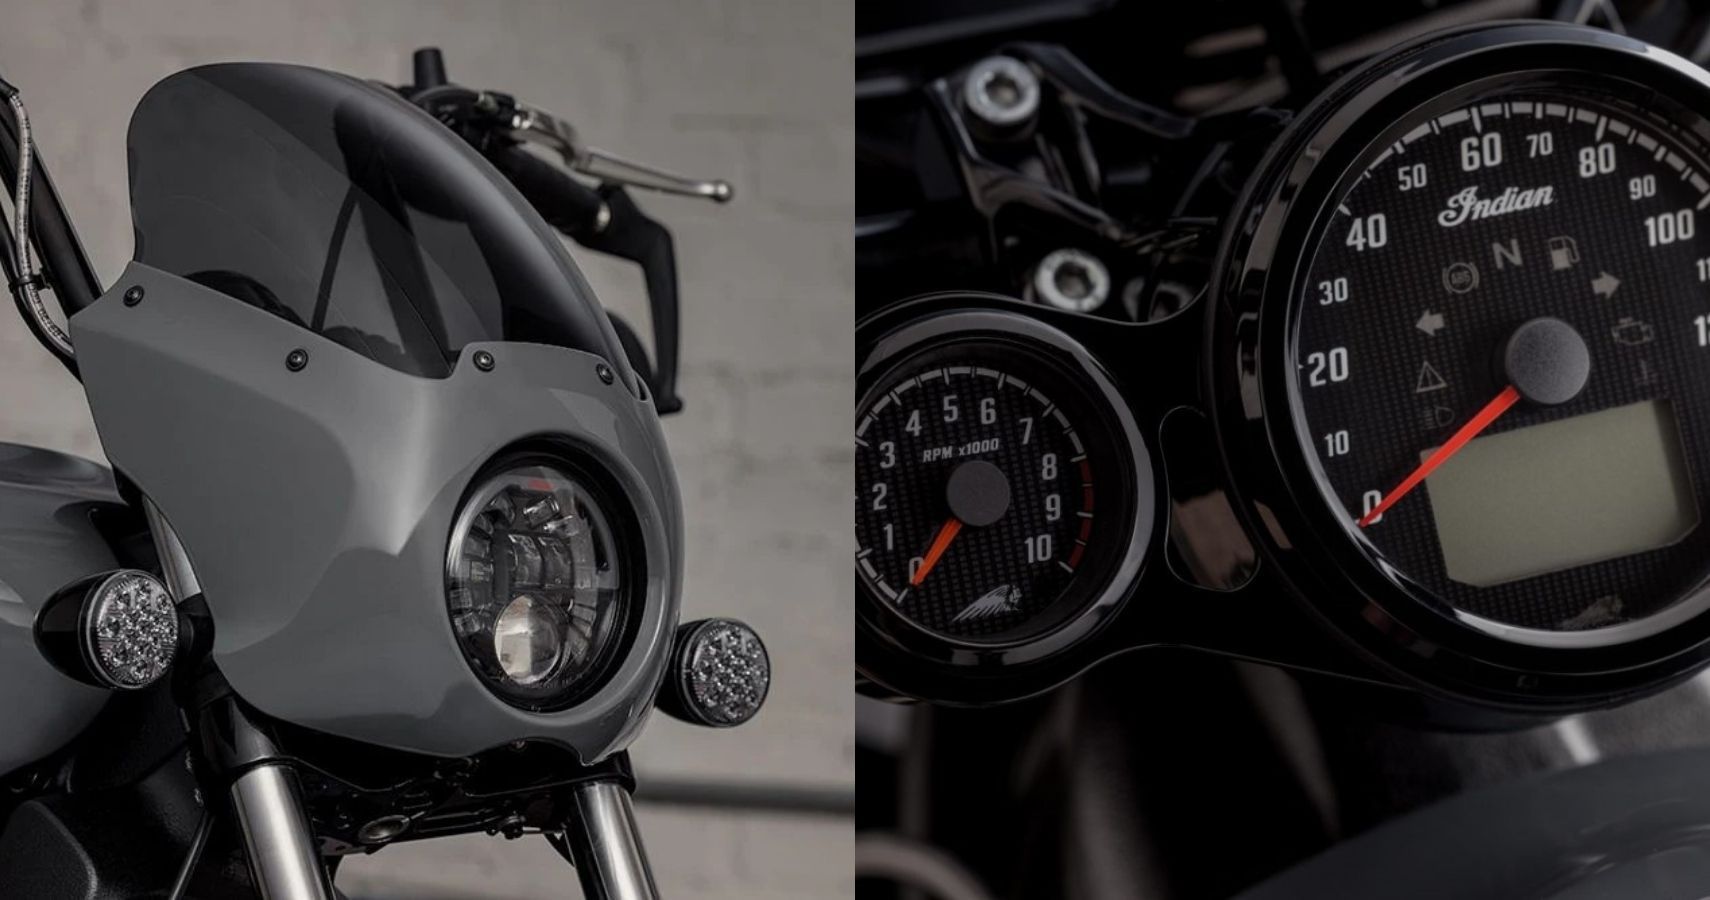 2022 Indian Scout Rogue adaptive headlamp and tachometer accessories